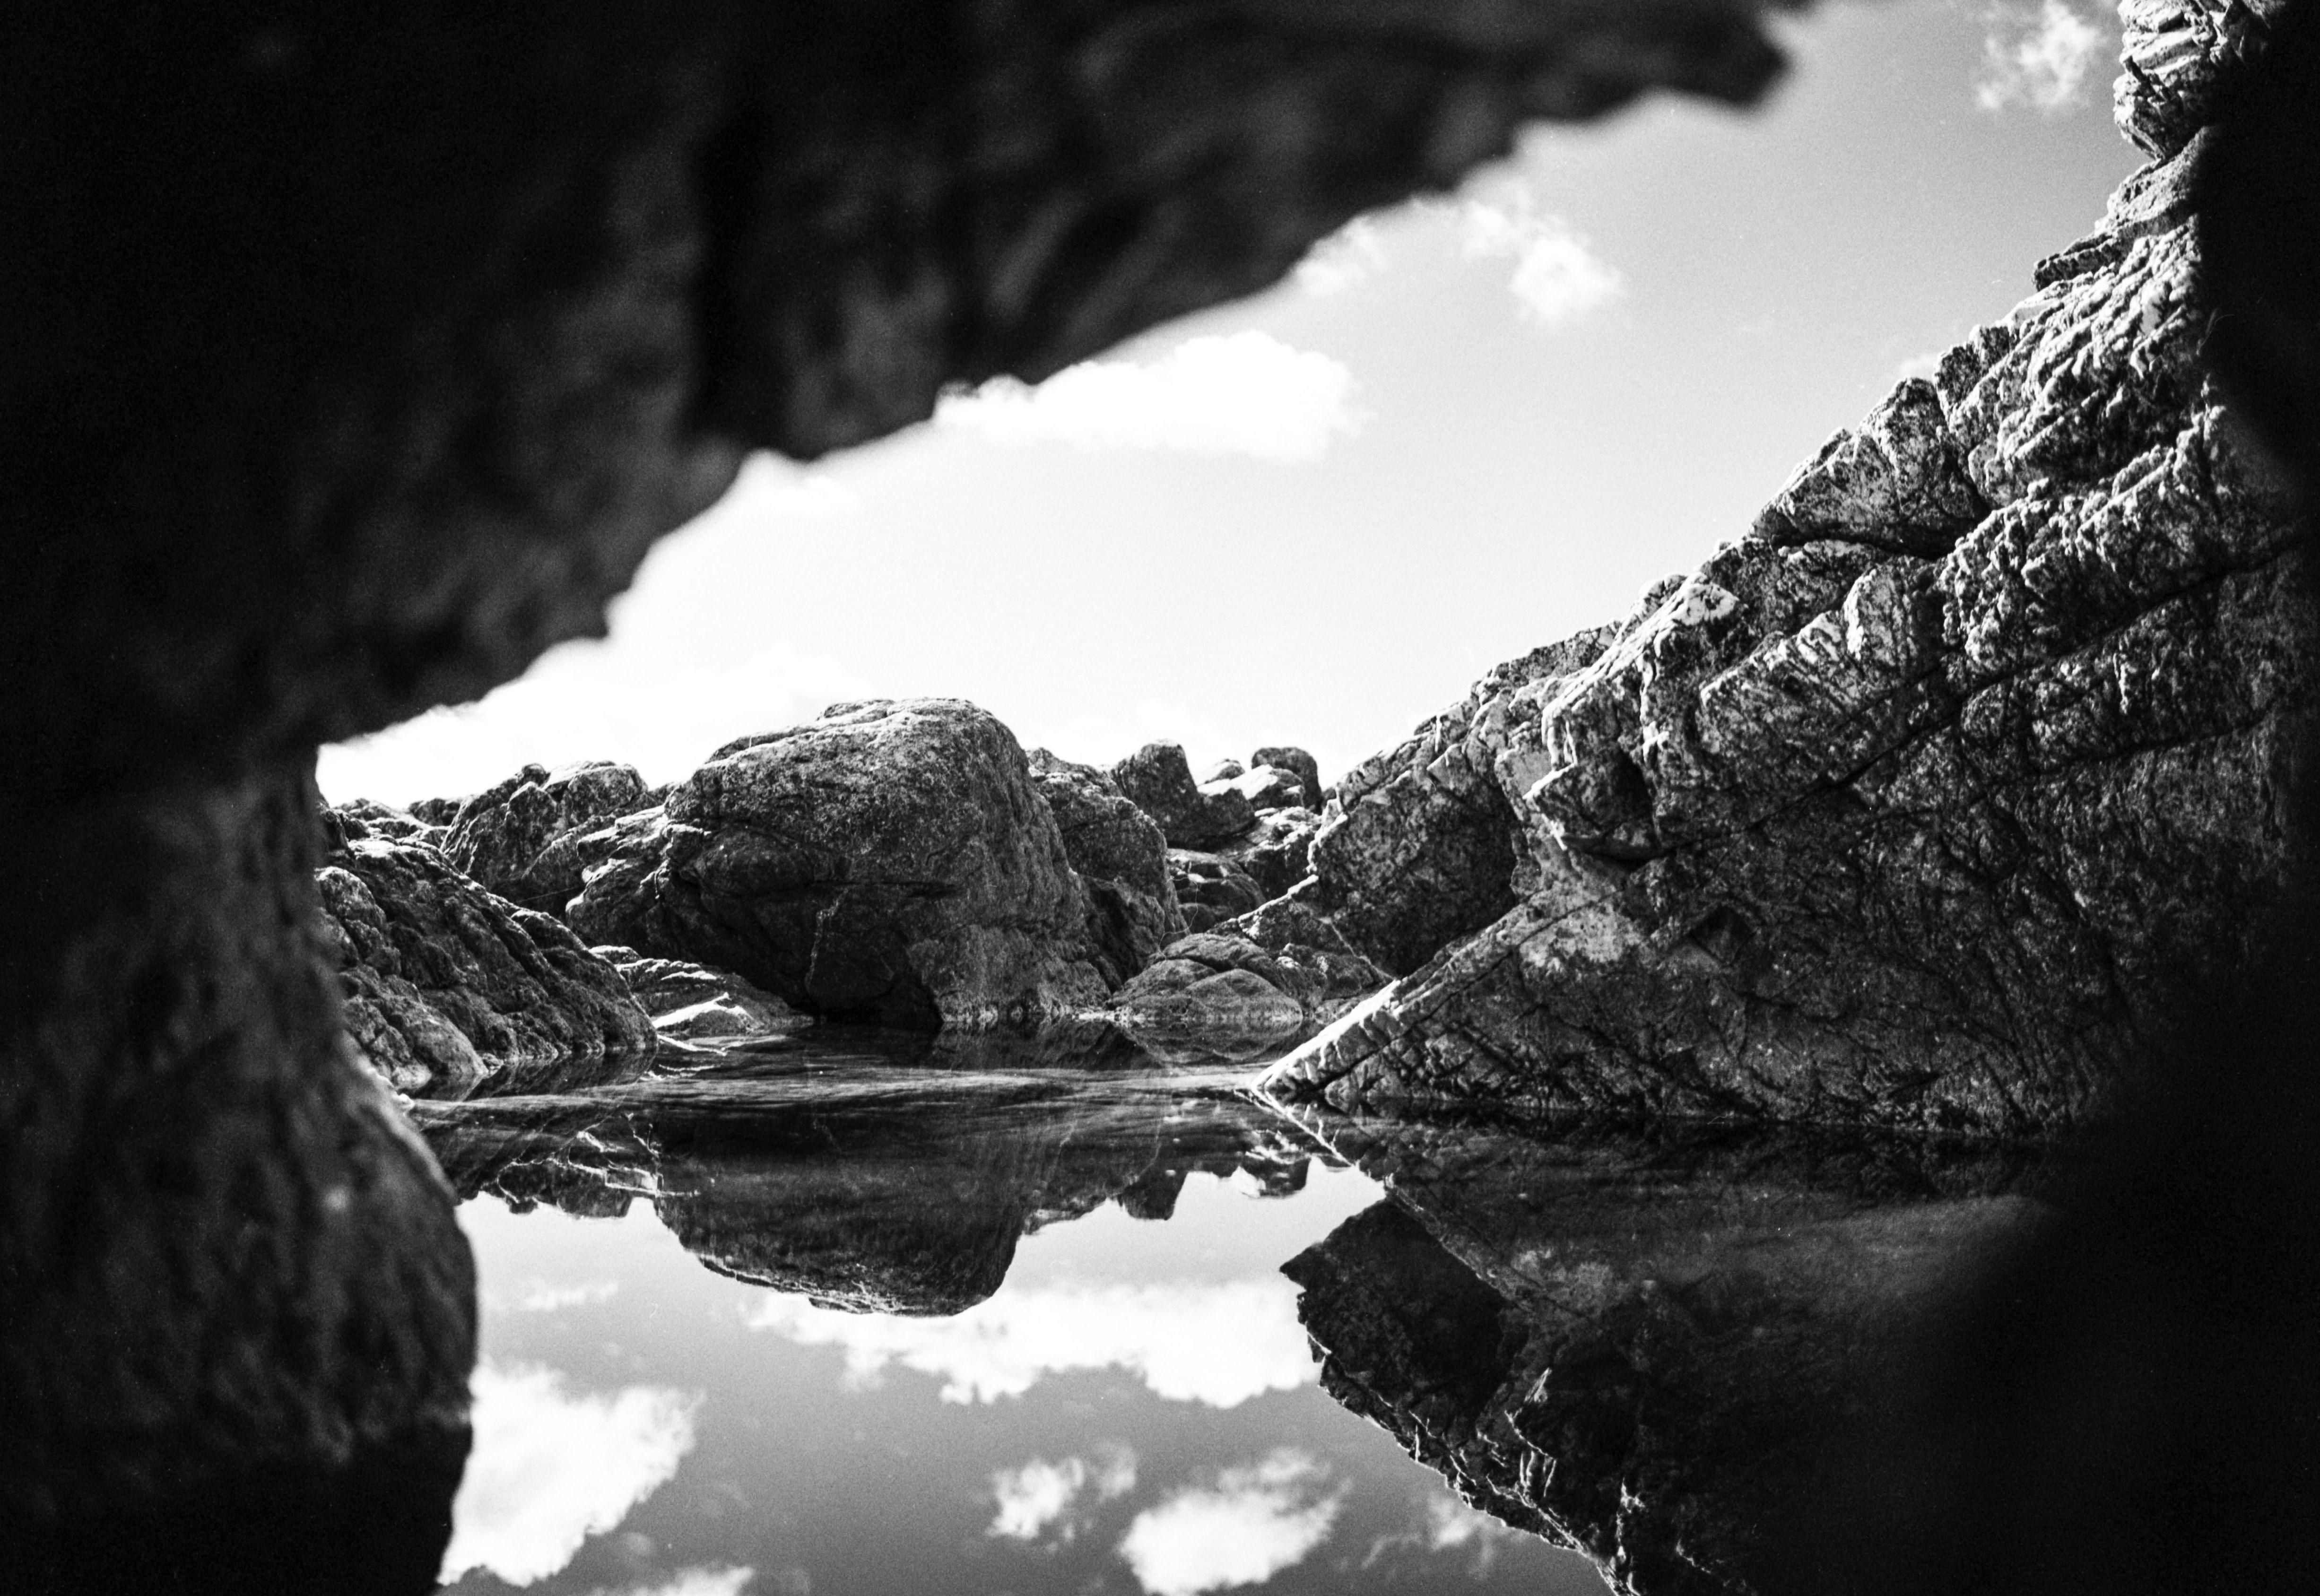 Rachell Hester Black and White Photograph - "Down the Rabbit Hole" An Infrared Silver Gelatin Photograph of a Tide Pool